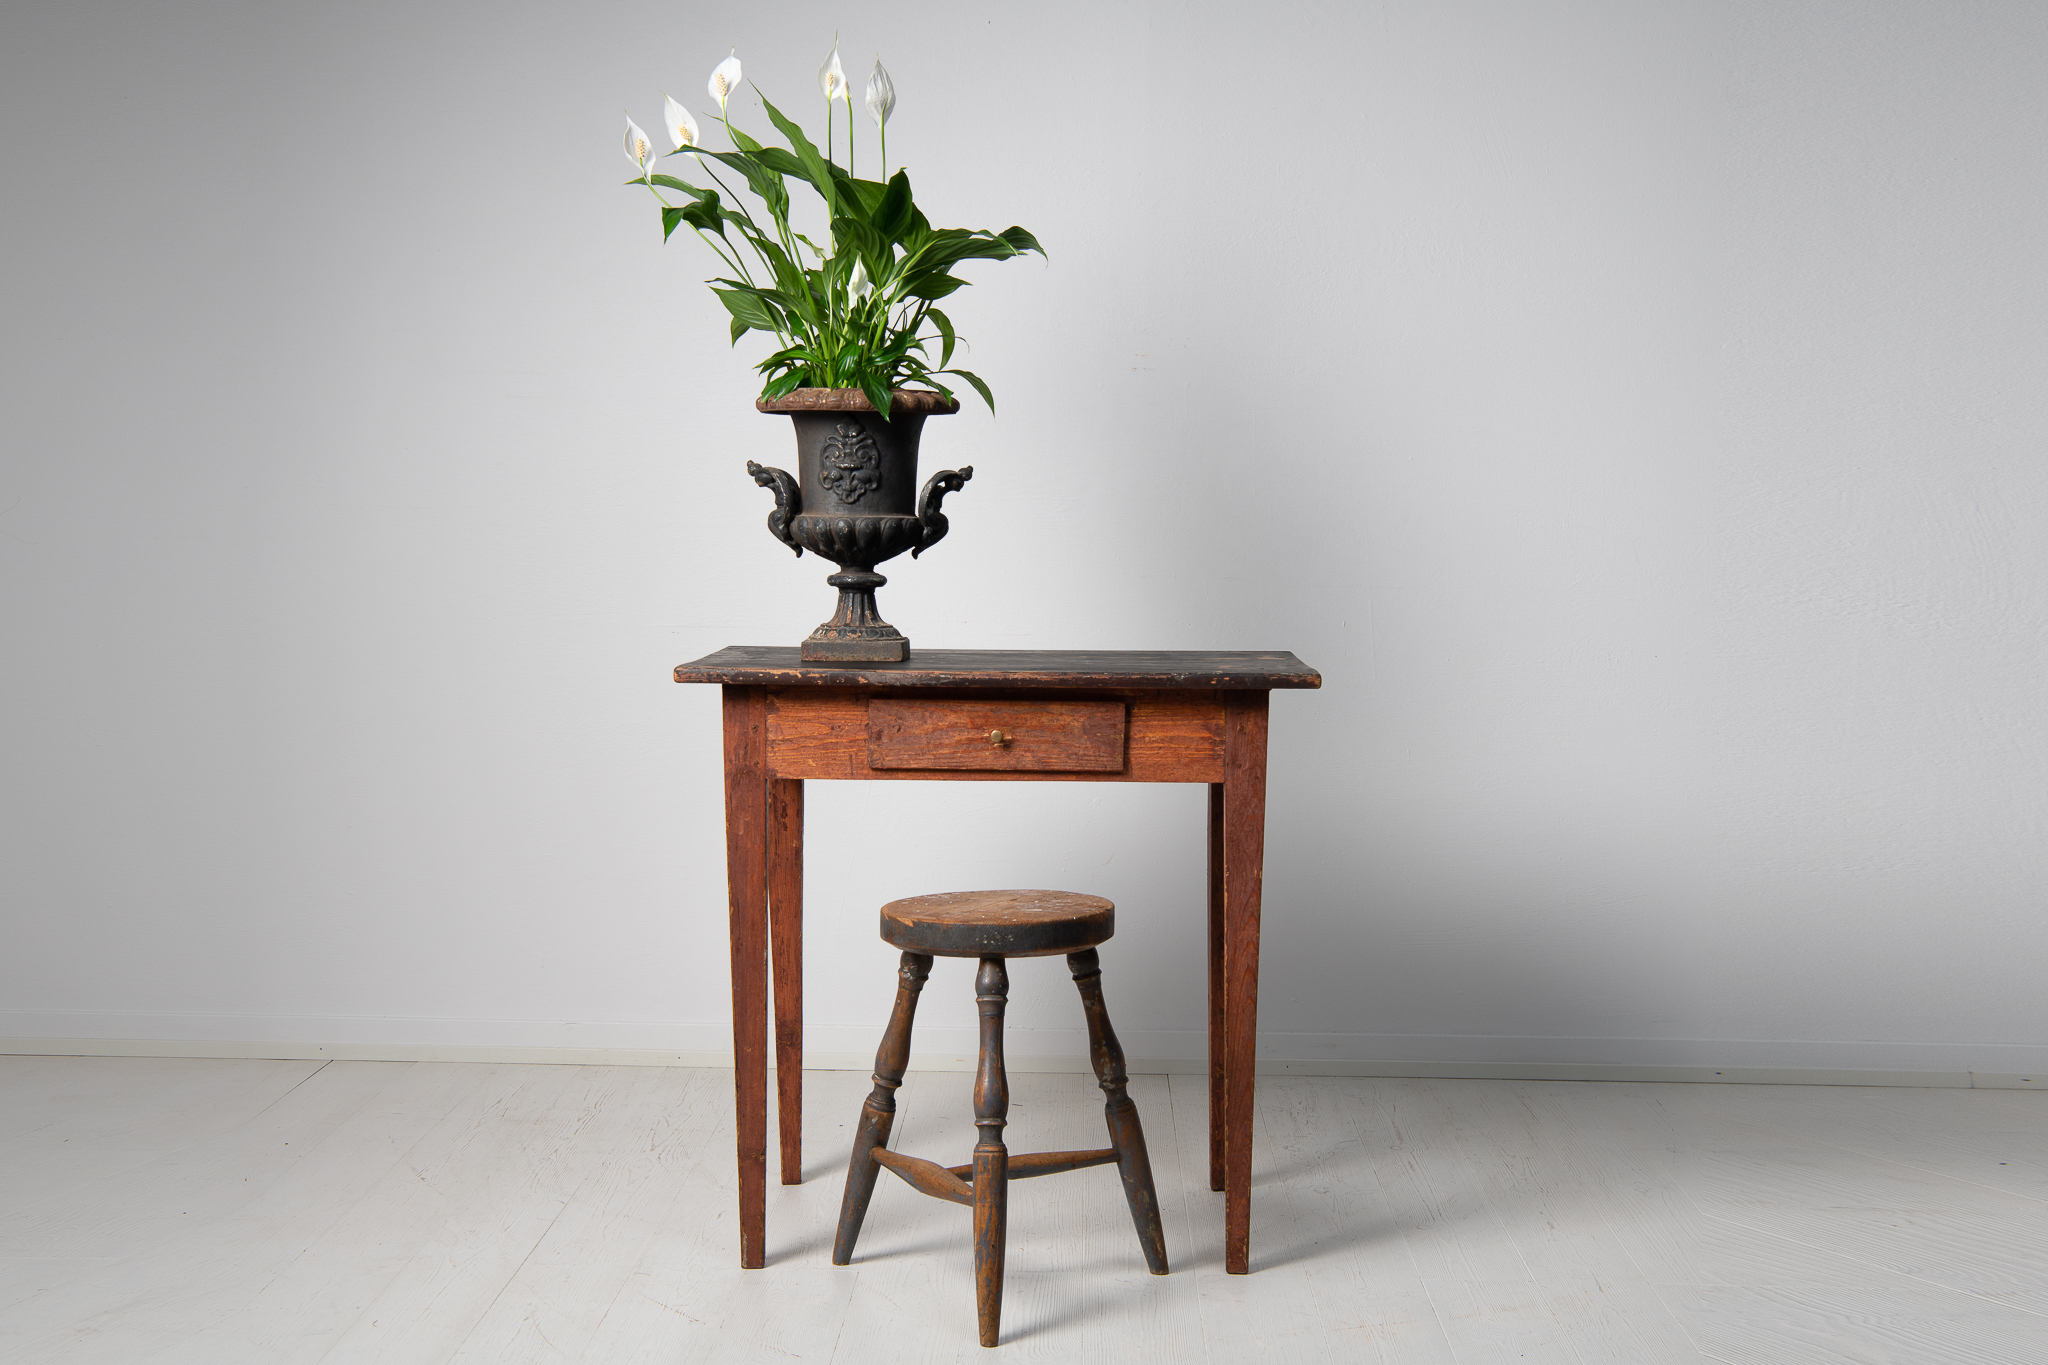 Swedish folk art side table in gustavian style with tapered legs and a drawer. The table is painted pine with traces of the original paint